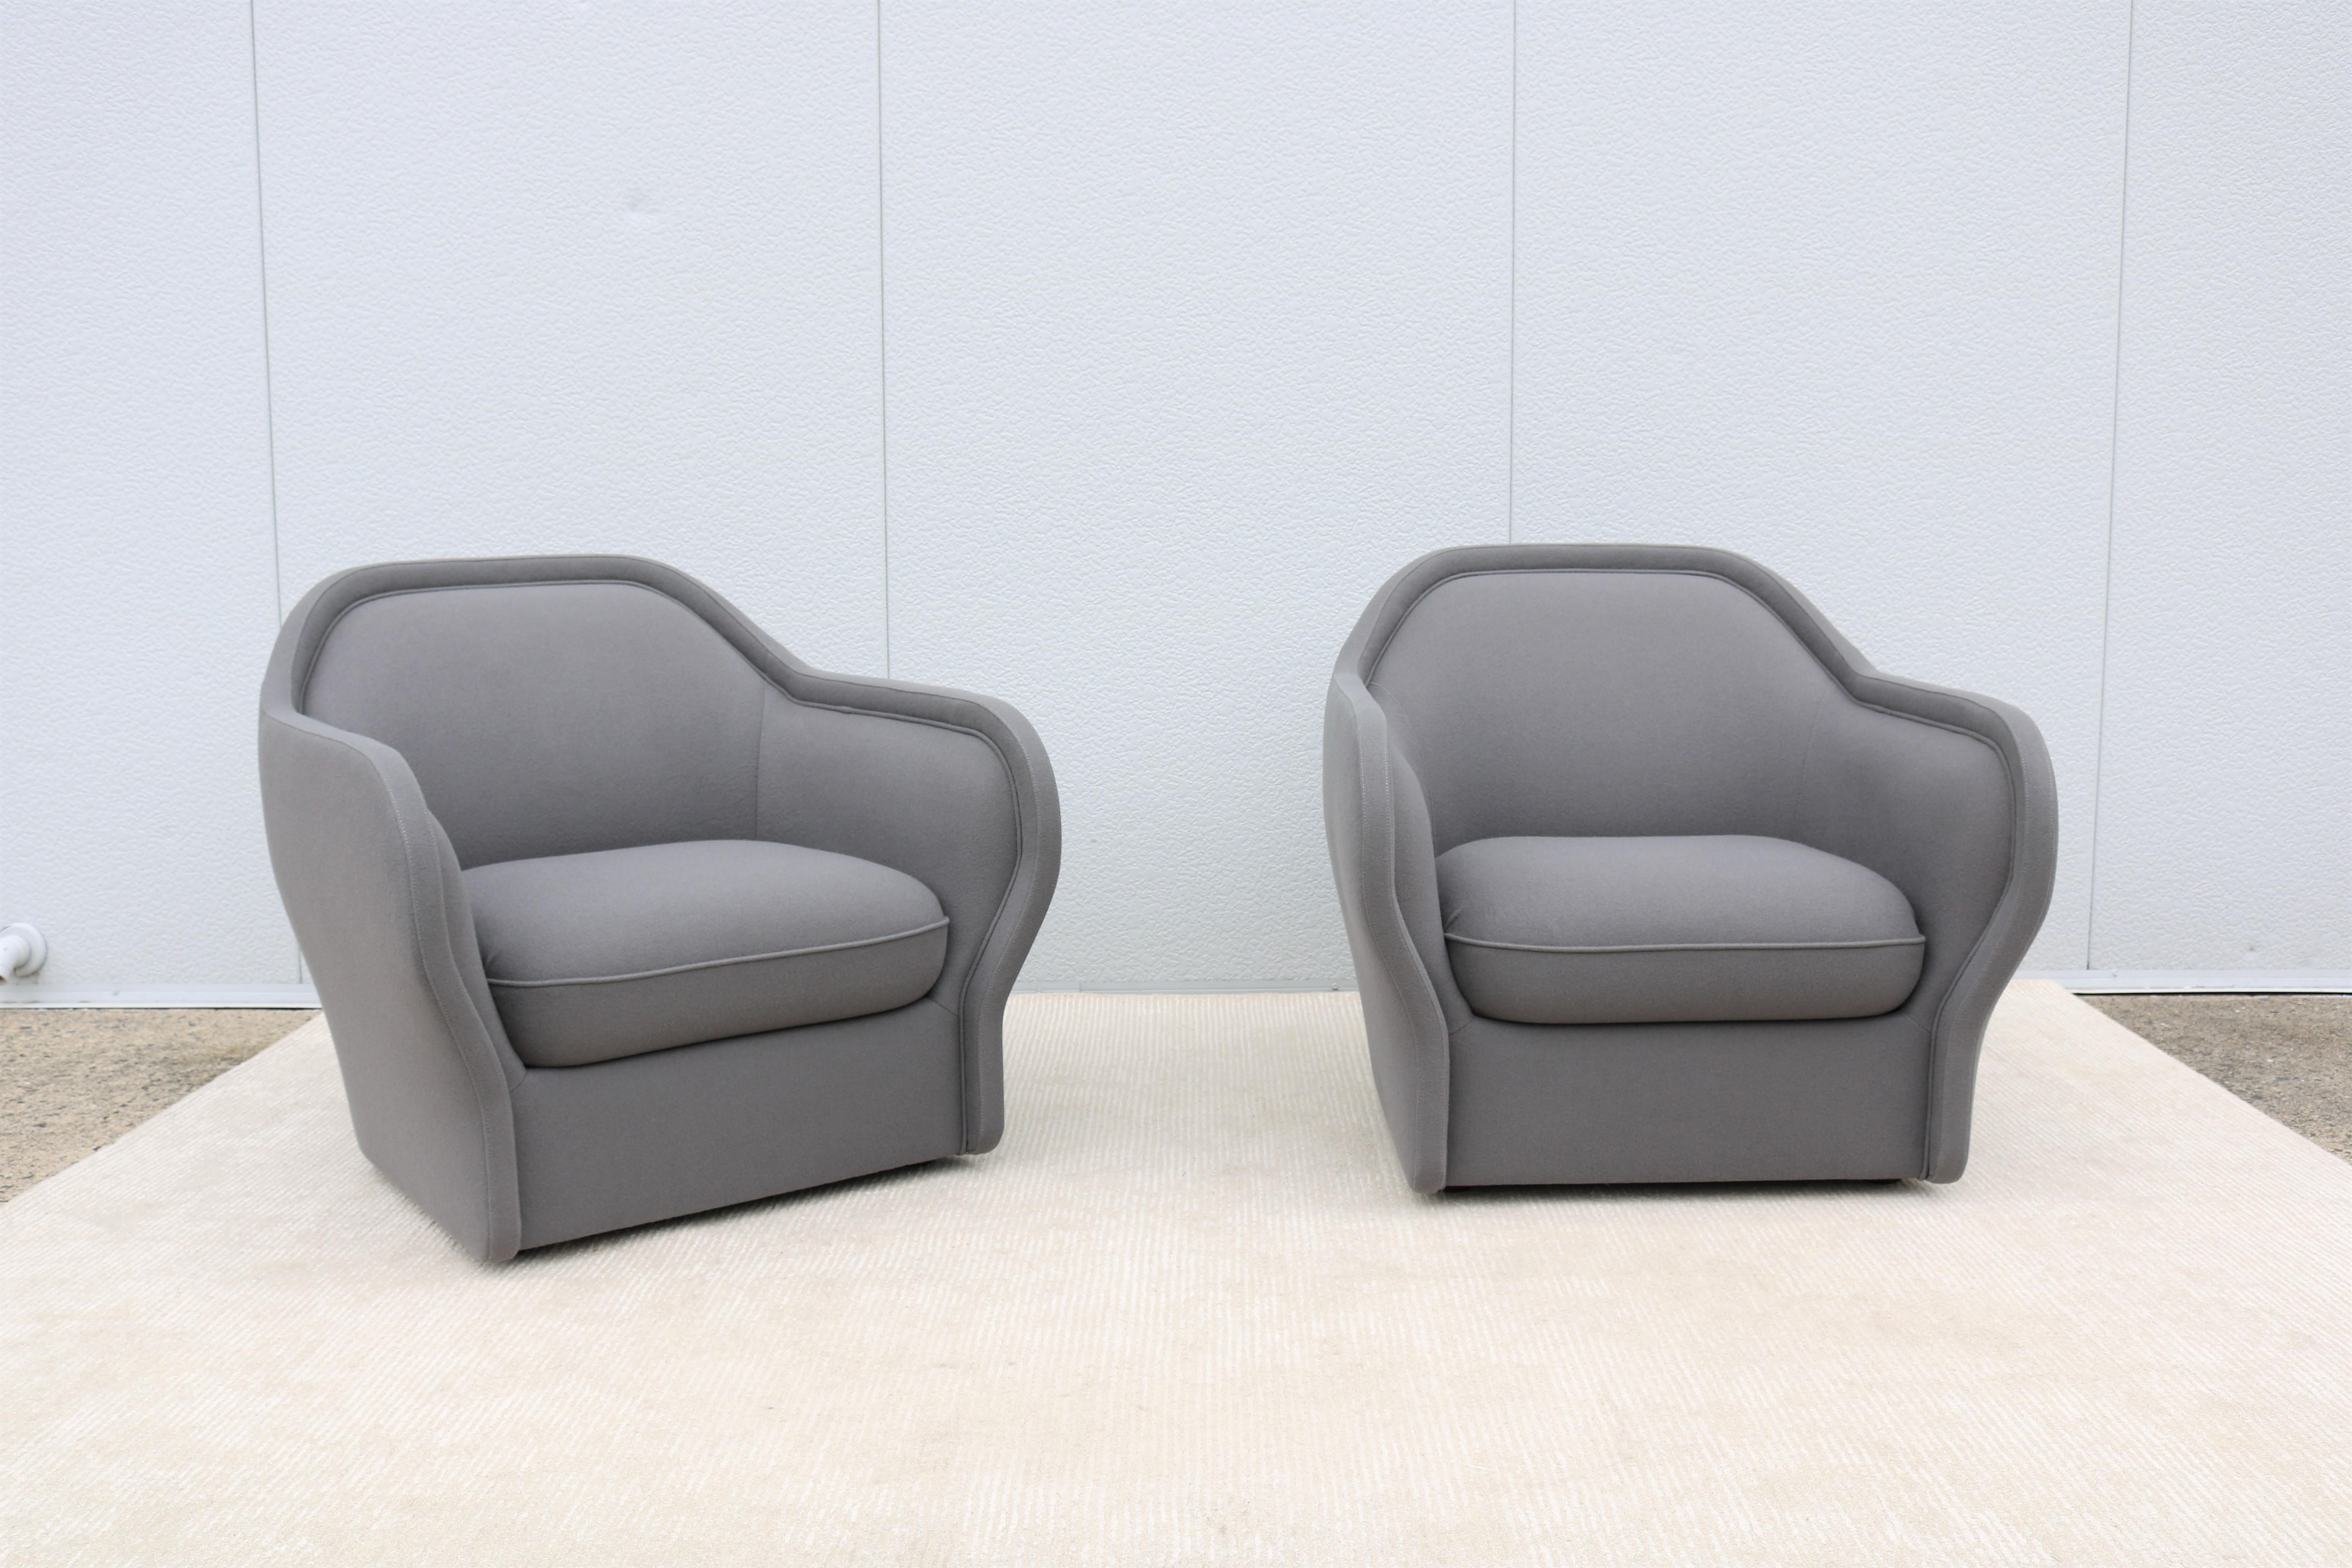 Fabulous pair of Bardot lounge chairs features a classic shape with clean modern detailing.
The seat, side and back are beautifully shaped and designed using high-quality materials and craftmanship.
The eye-catching curves design is elegant,